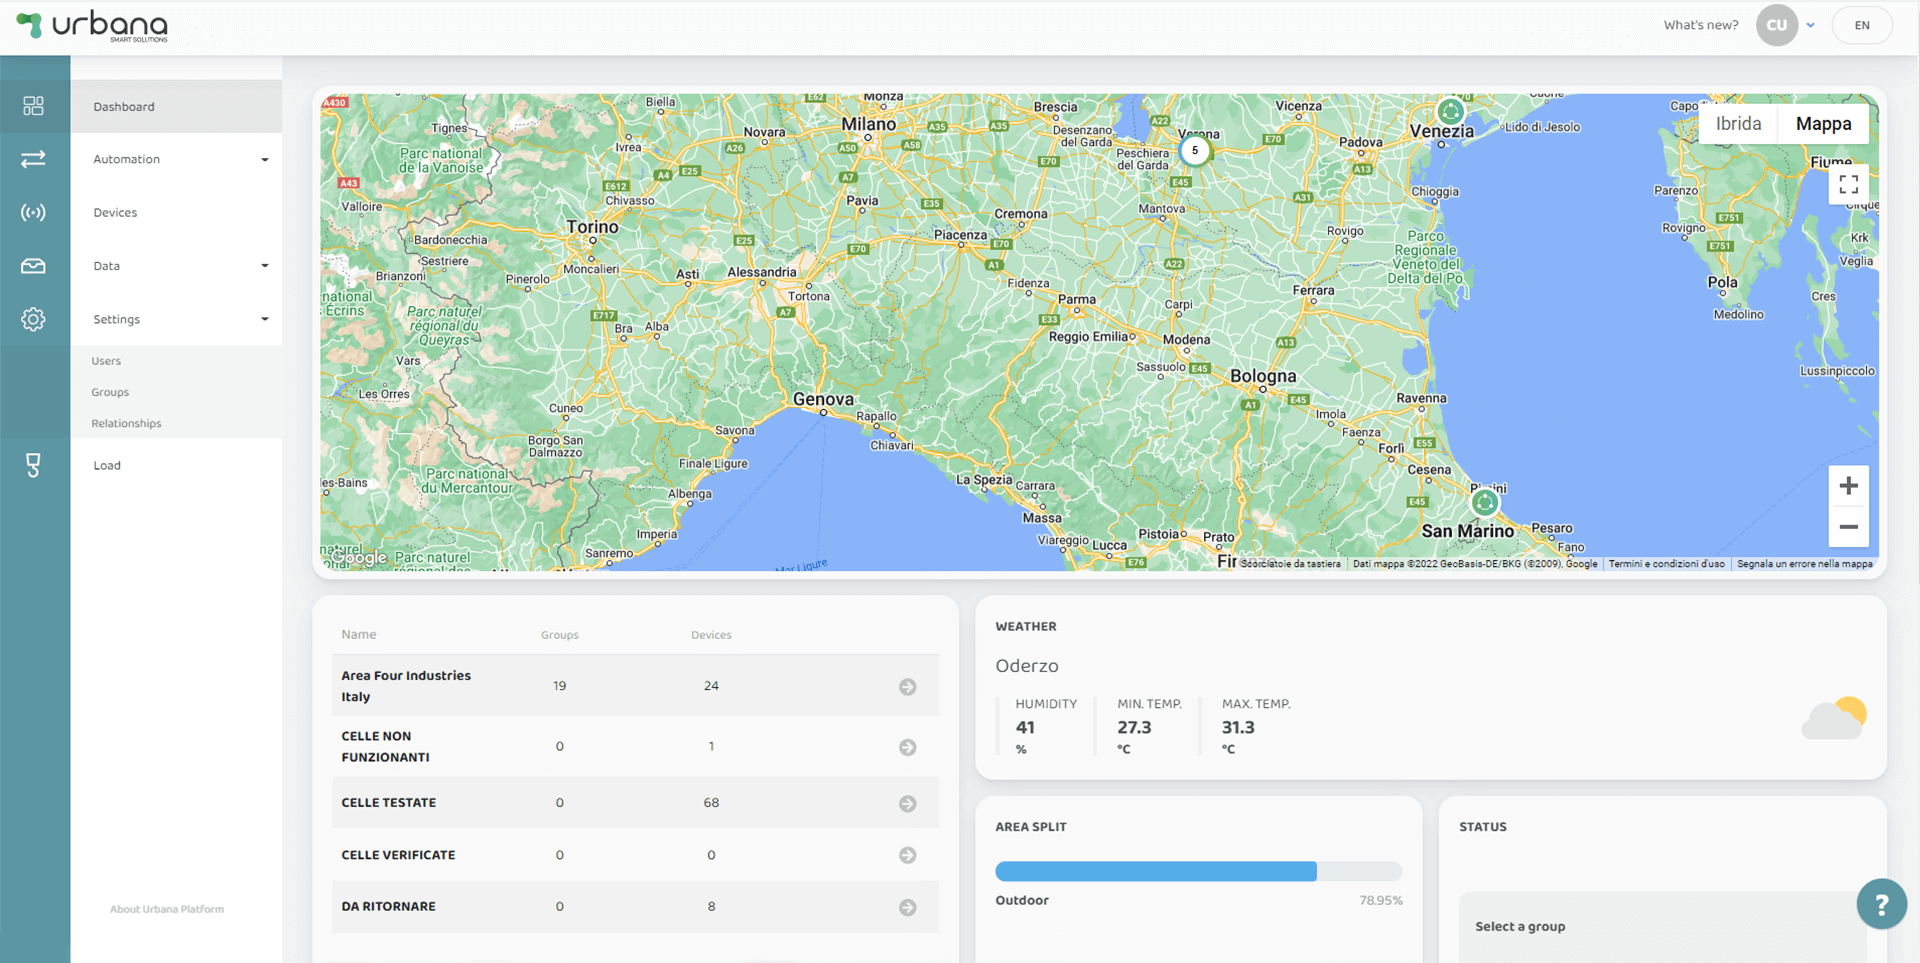 A general Dashboard that summarizes the geographical locations of the cells clustered into groups and finally individual nodes. It provides an overview of all installations and events. At a glance you can see the status of all cells and check if there are anomalies and where they are located.